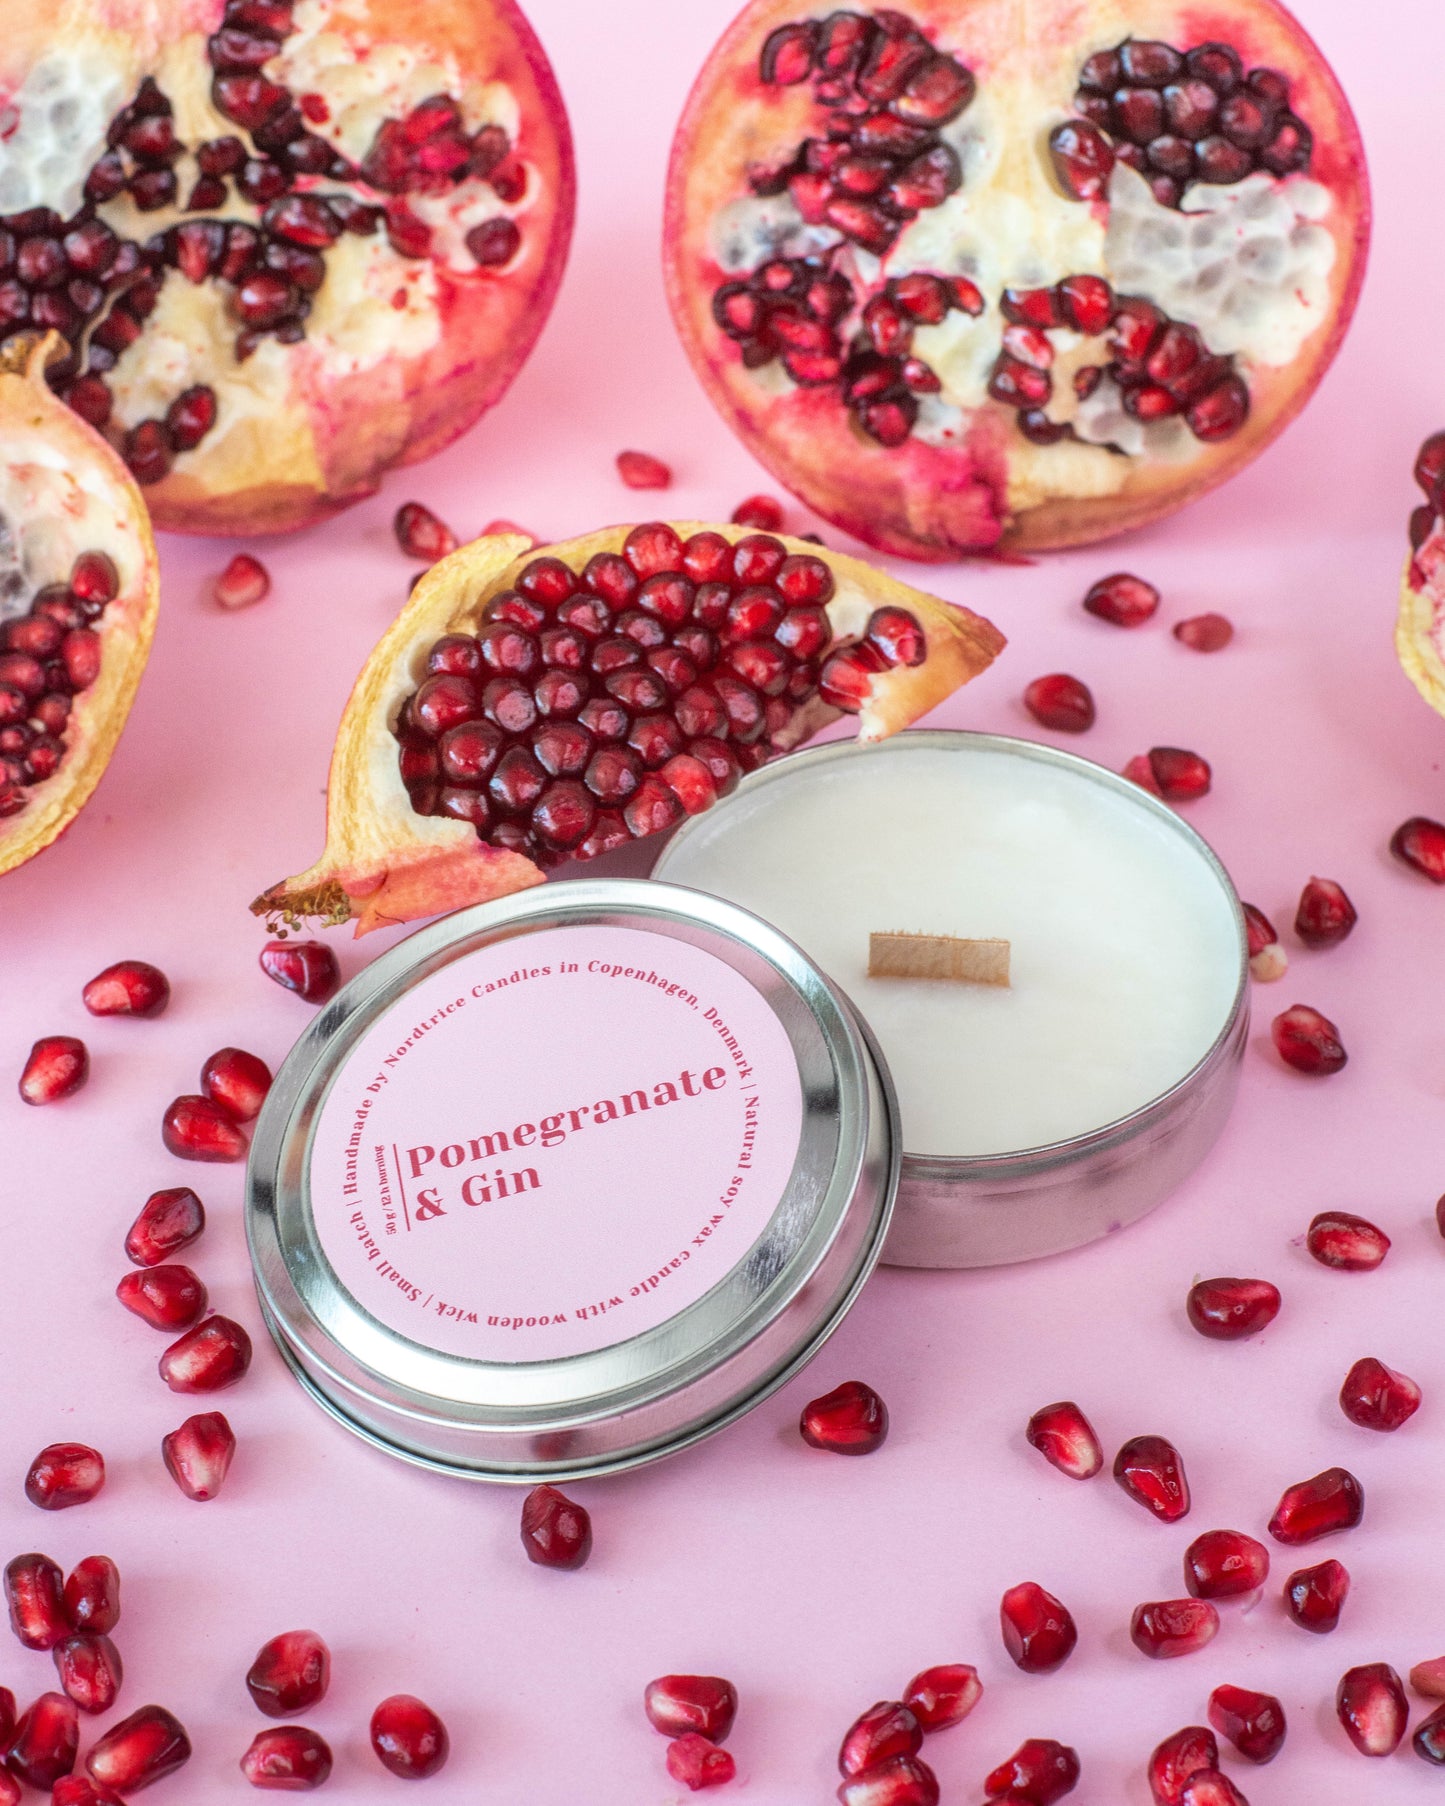 Soy Scented Candle, Pomegranate & Gin M/L size